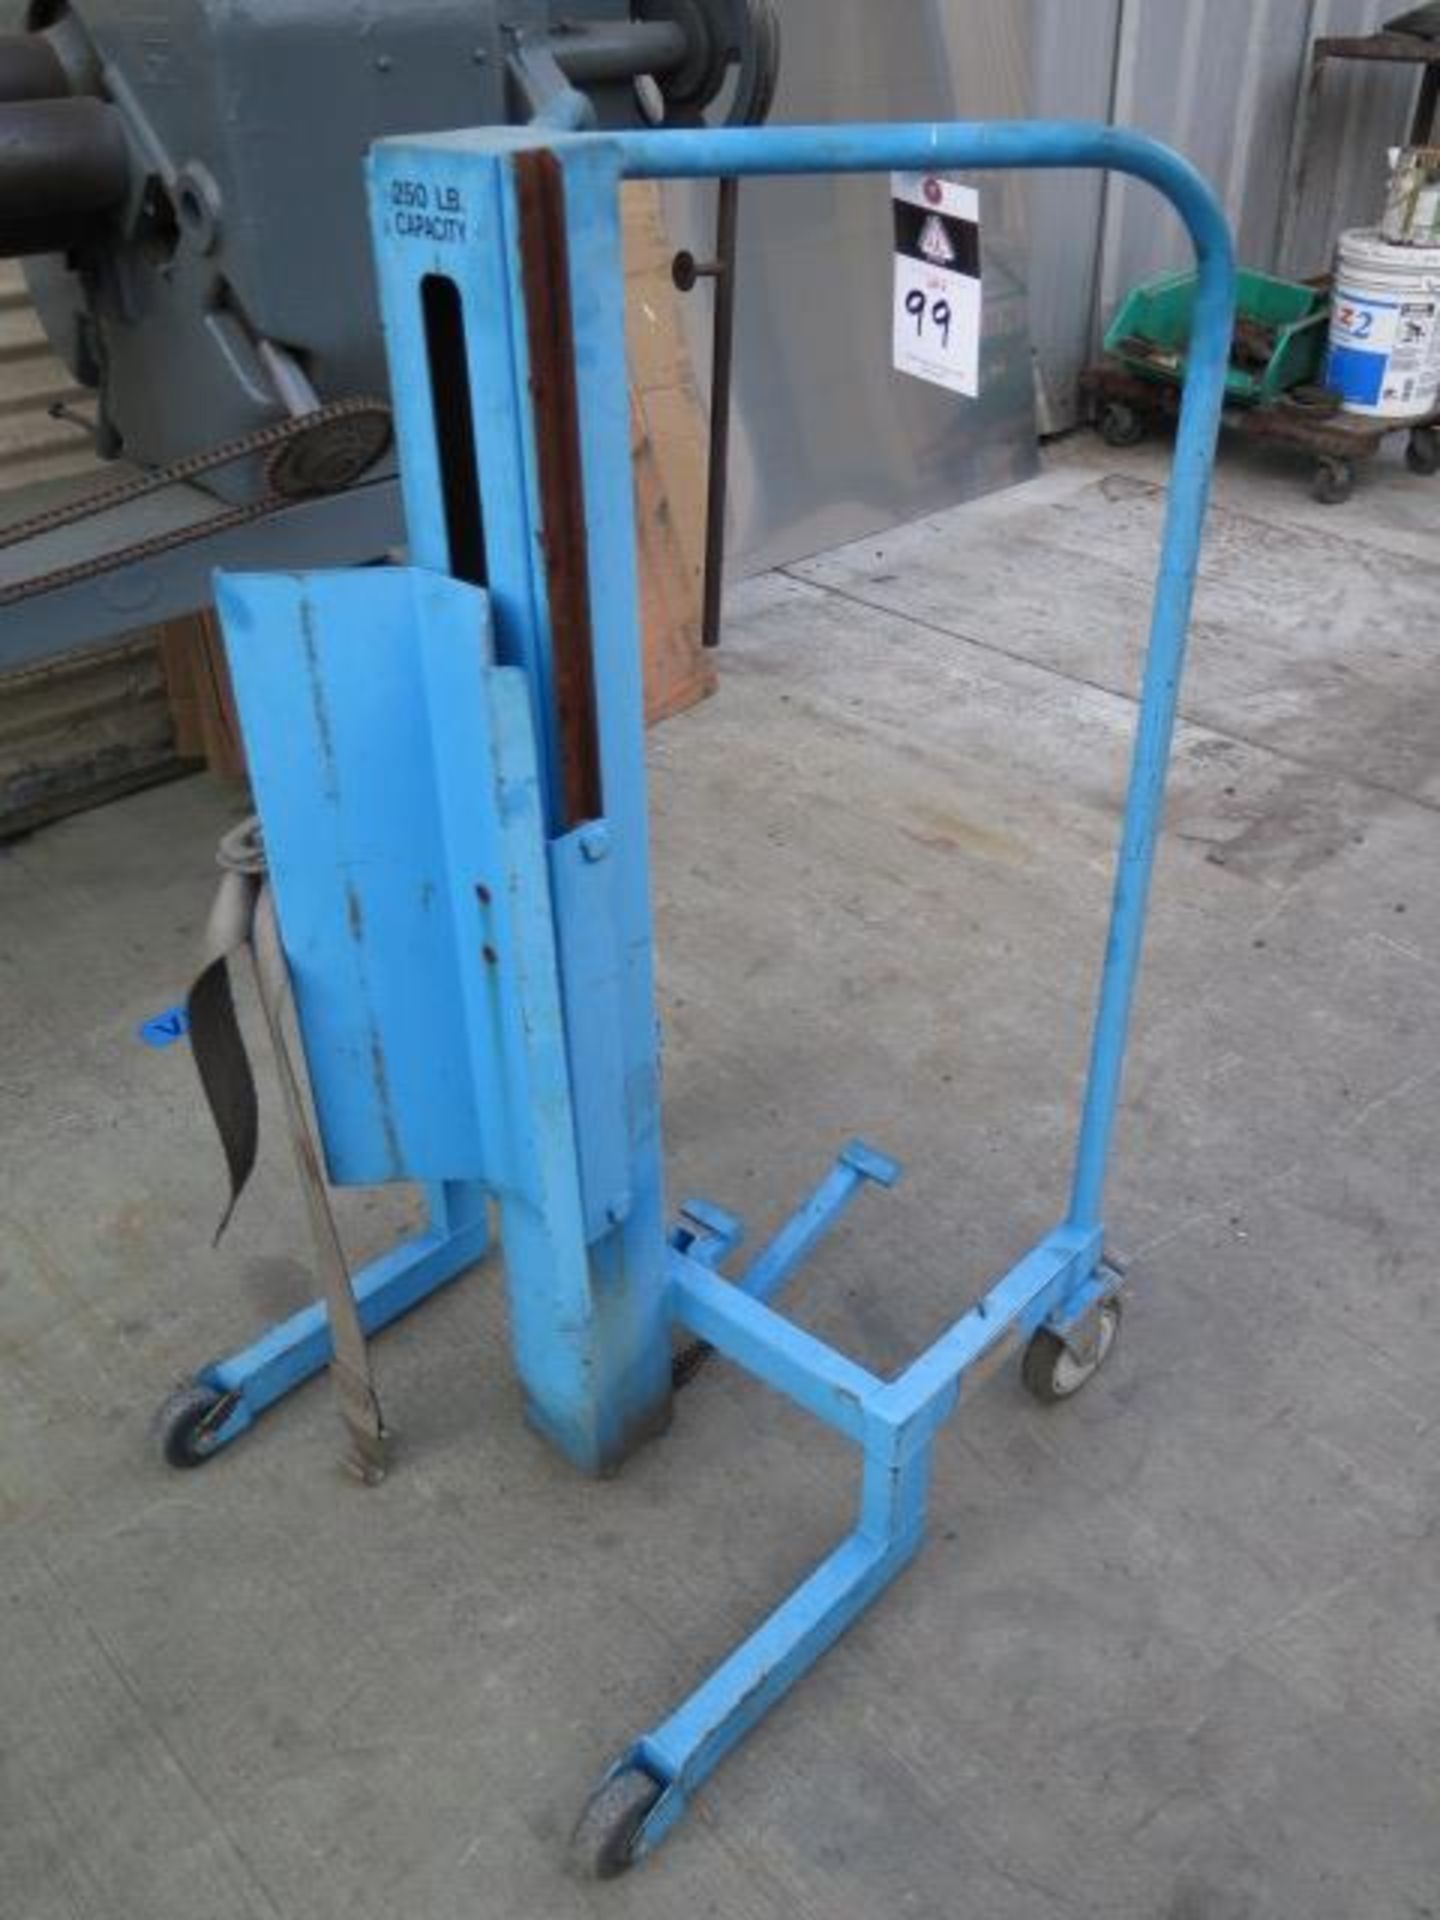 Tanks-A-Lot Cannister Lift (SOLD AS-IS - NO WARRANTY)